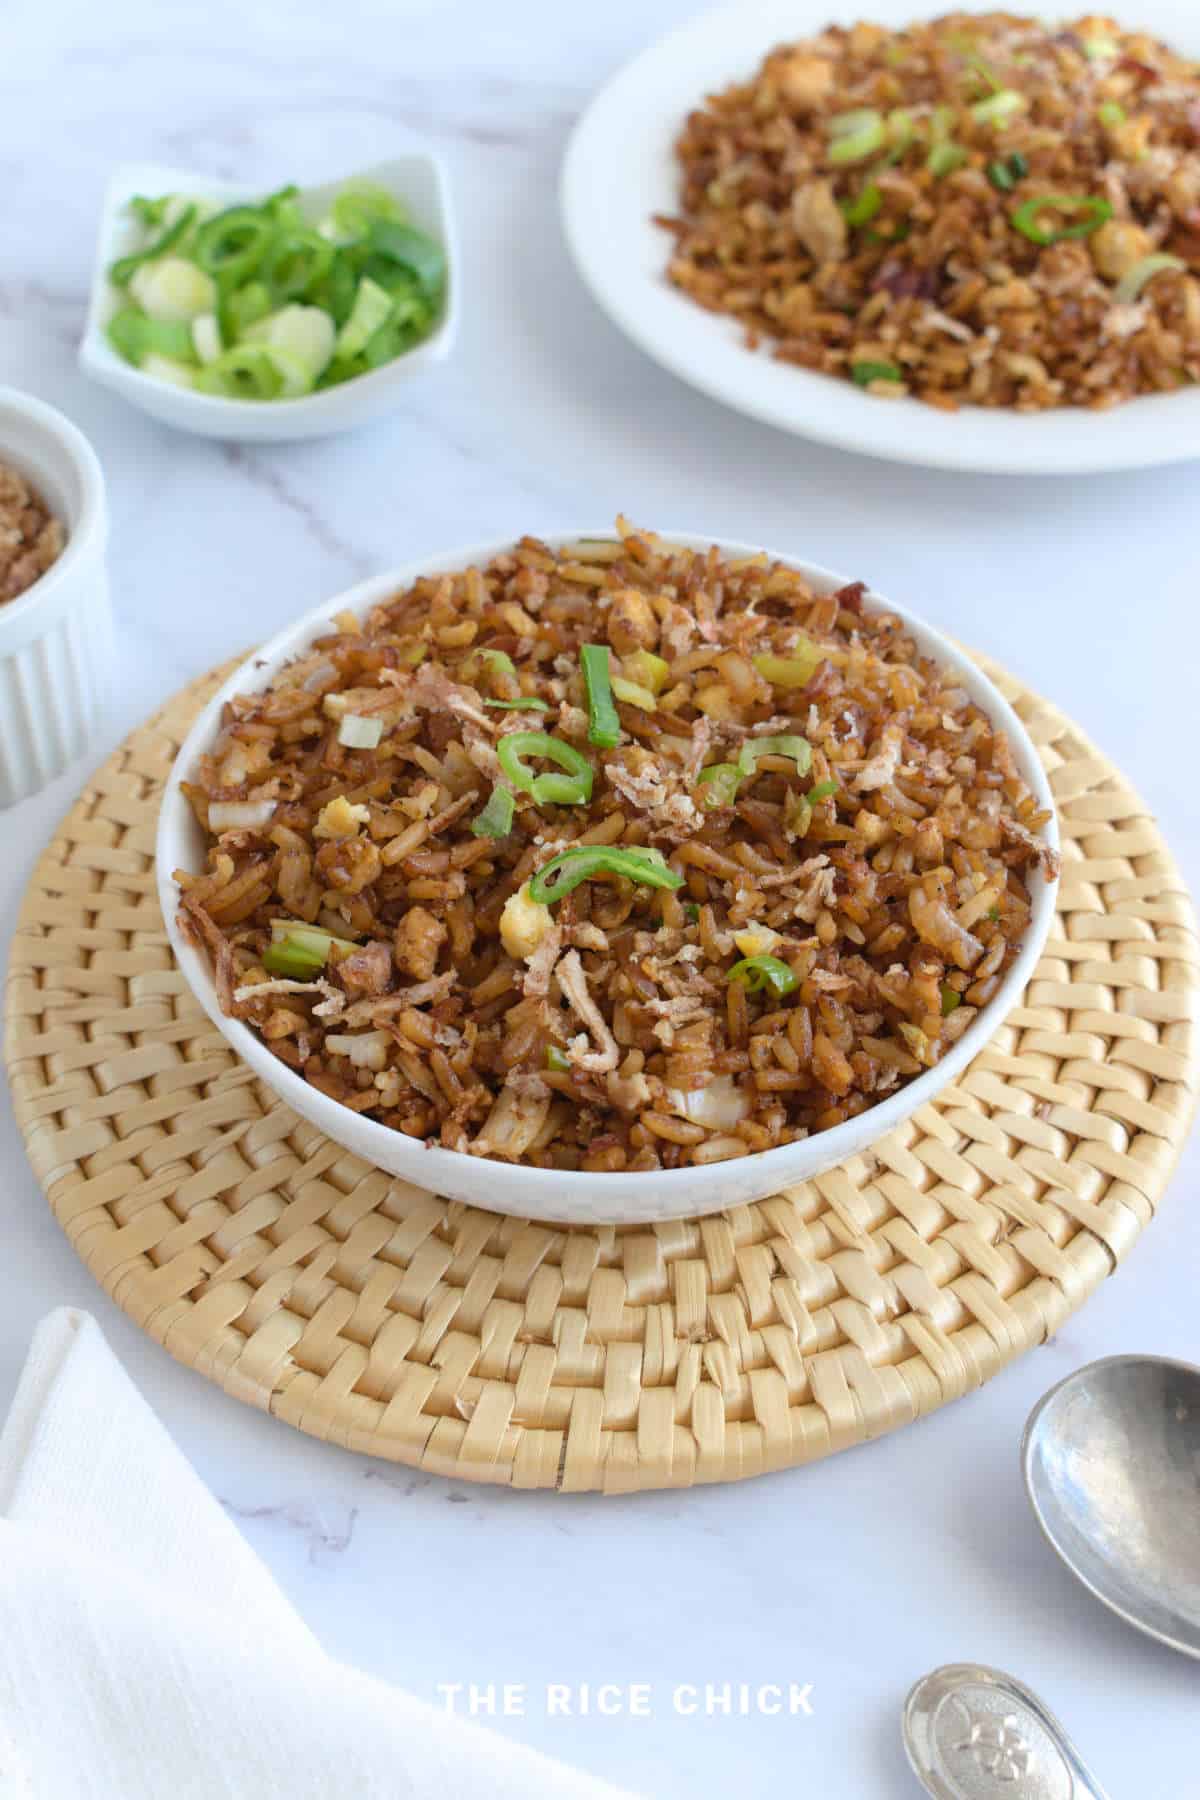 Fried rice in a white bowl.